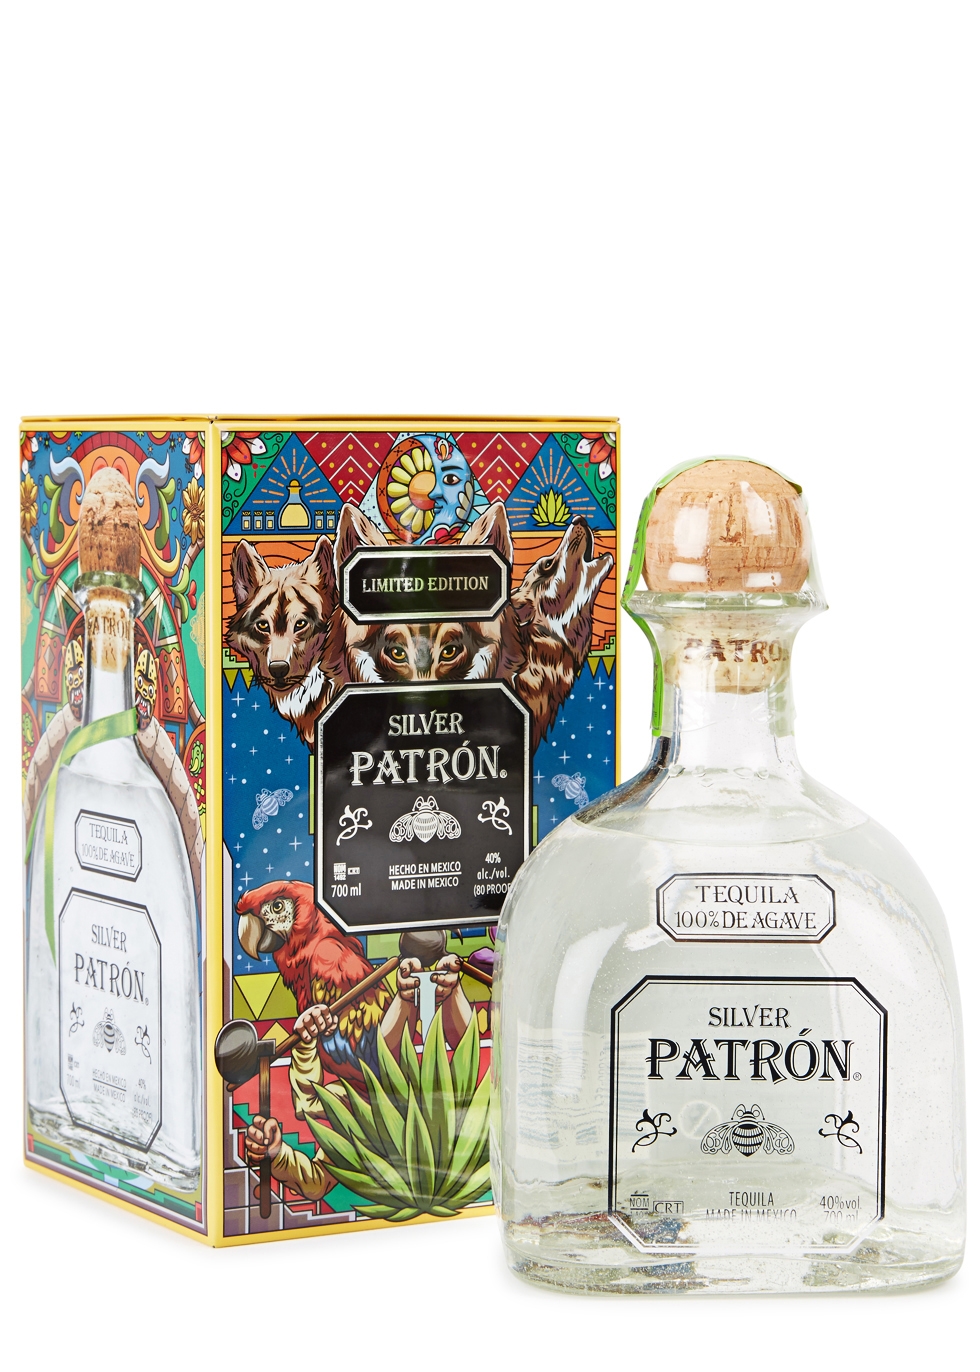 Patron Silver Tequila Limited Edition Heritage Tin 2018 Harvey Nichols